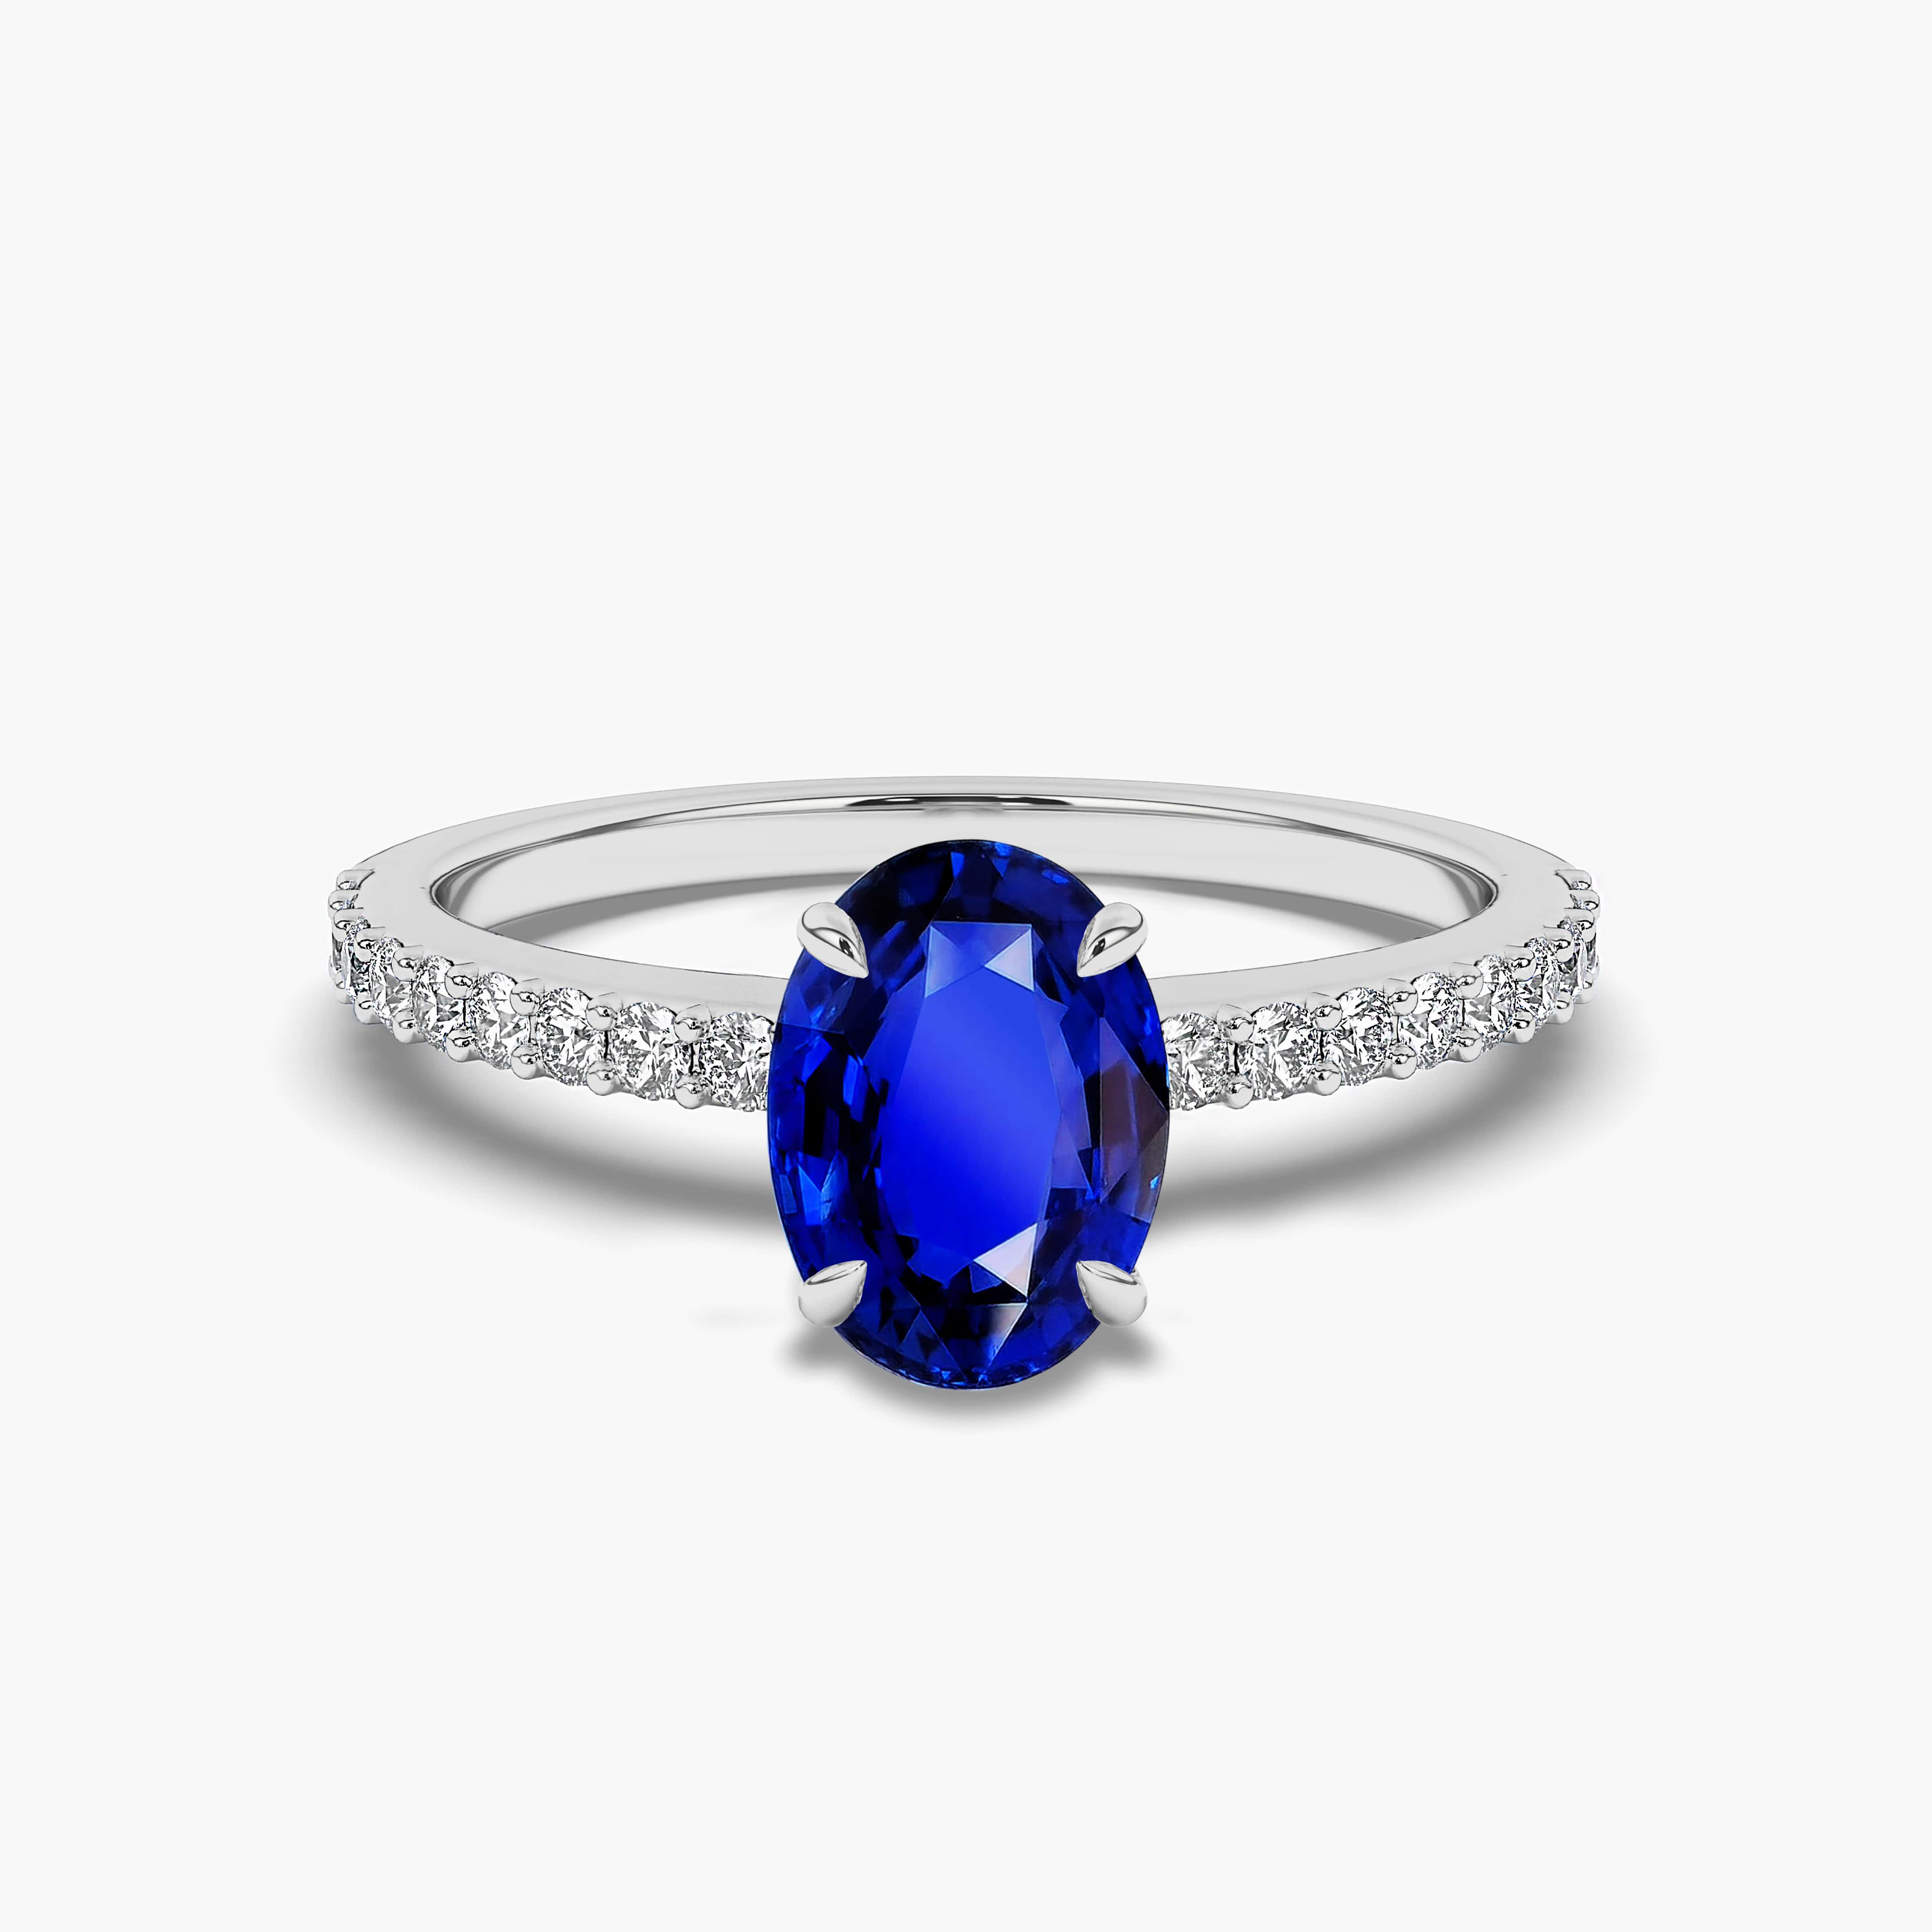 Oval Cut Blue Sapphire and Diamonds Engagement Ring in White Gold